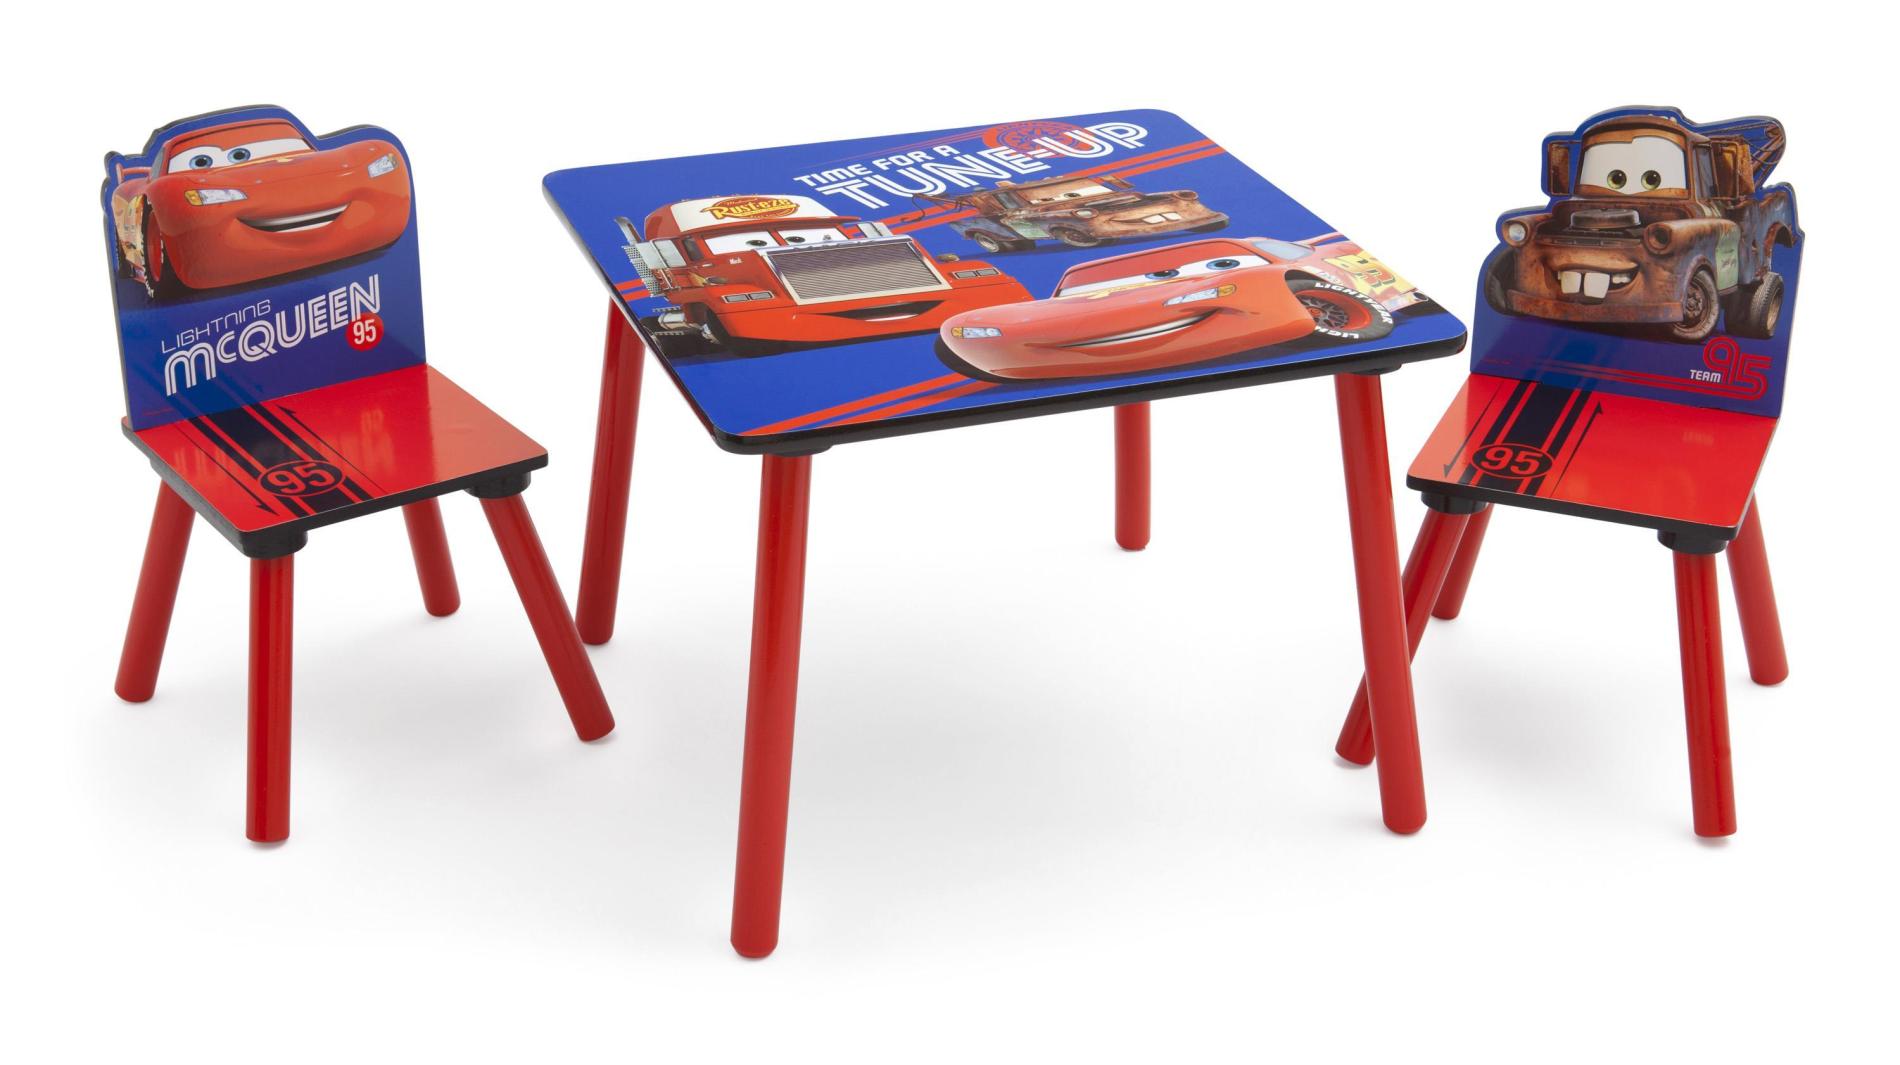 Disney Toddler's Cars Table & Chairs Set Team 95